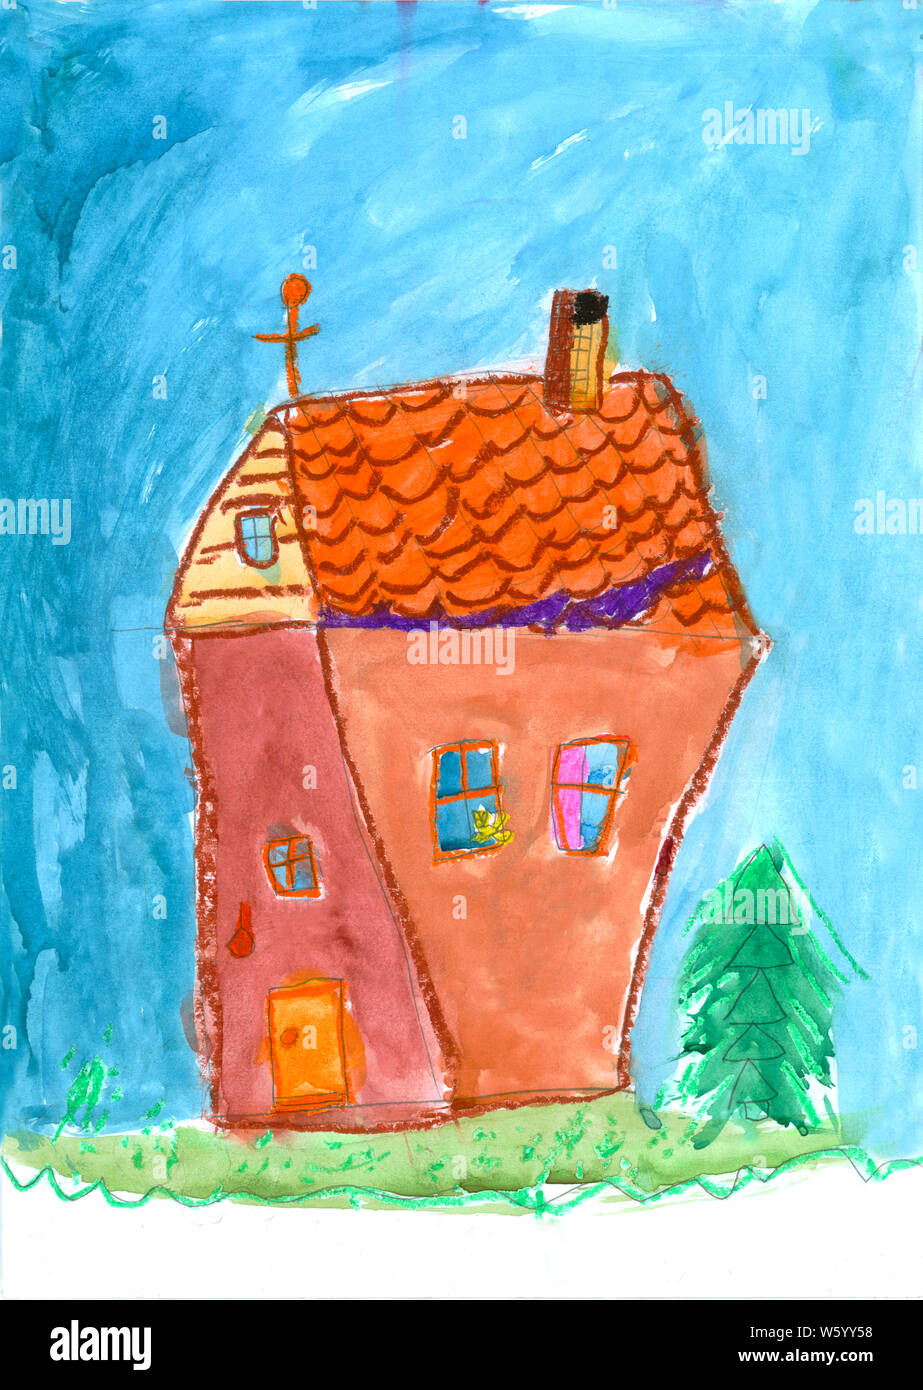 House in the village. Children's drawing Stock Photo - Alamy